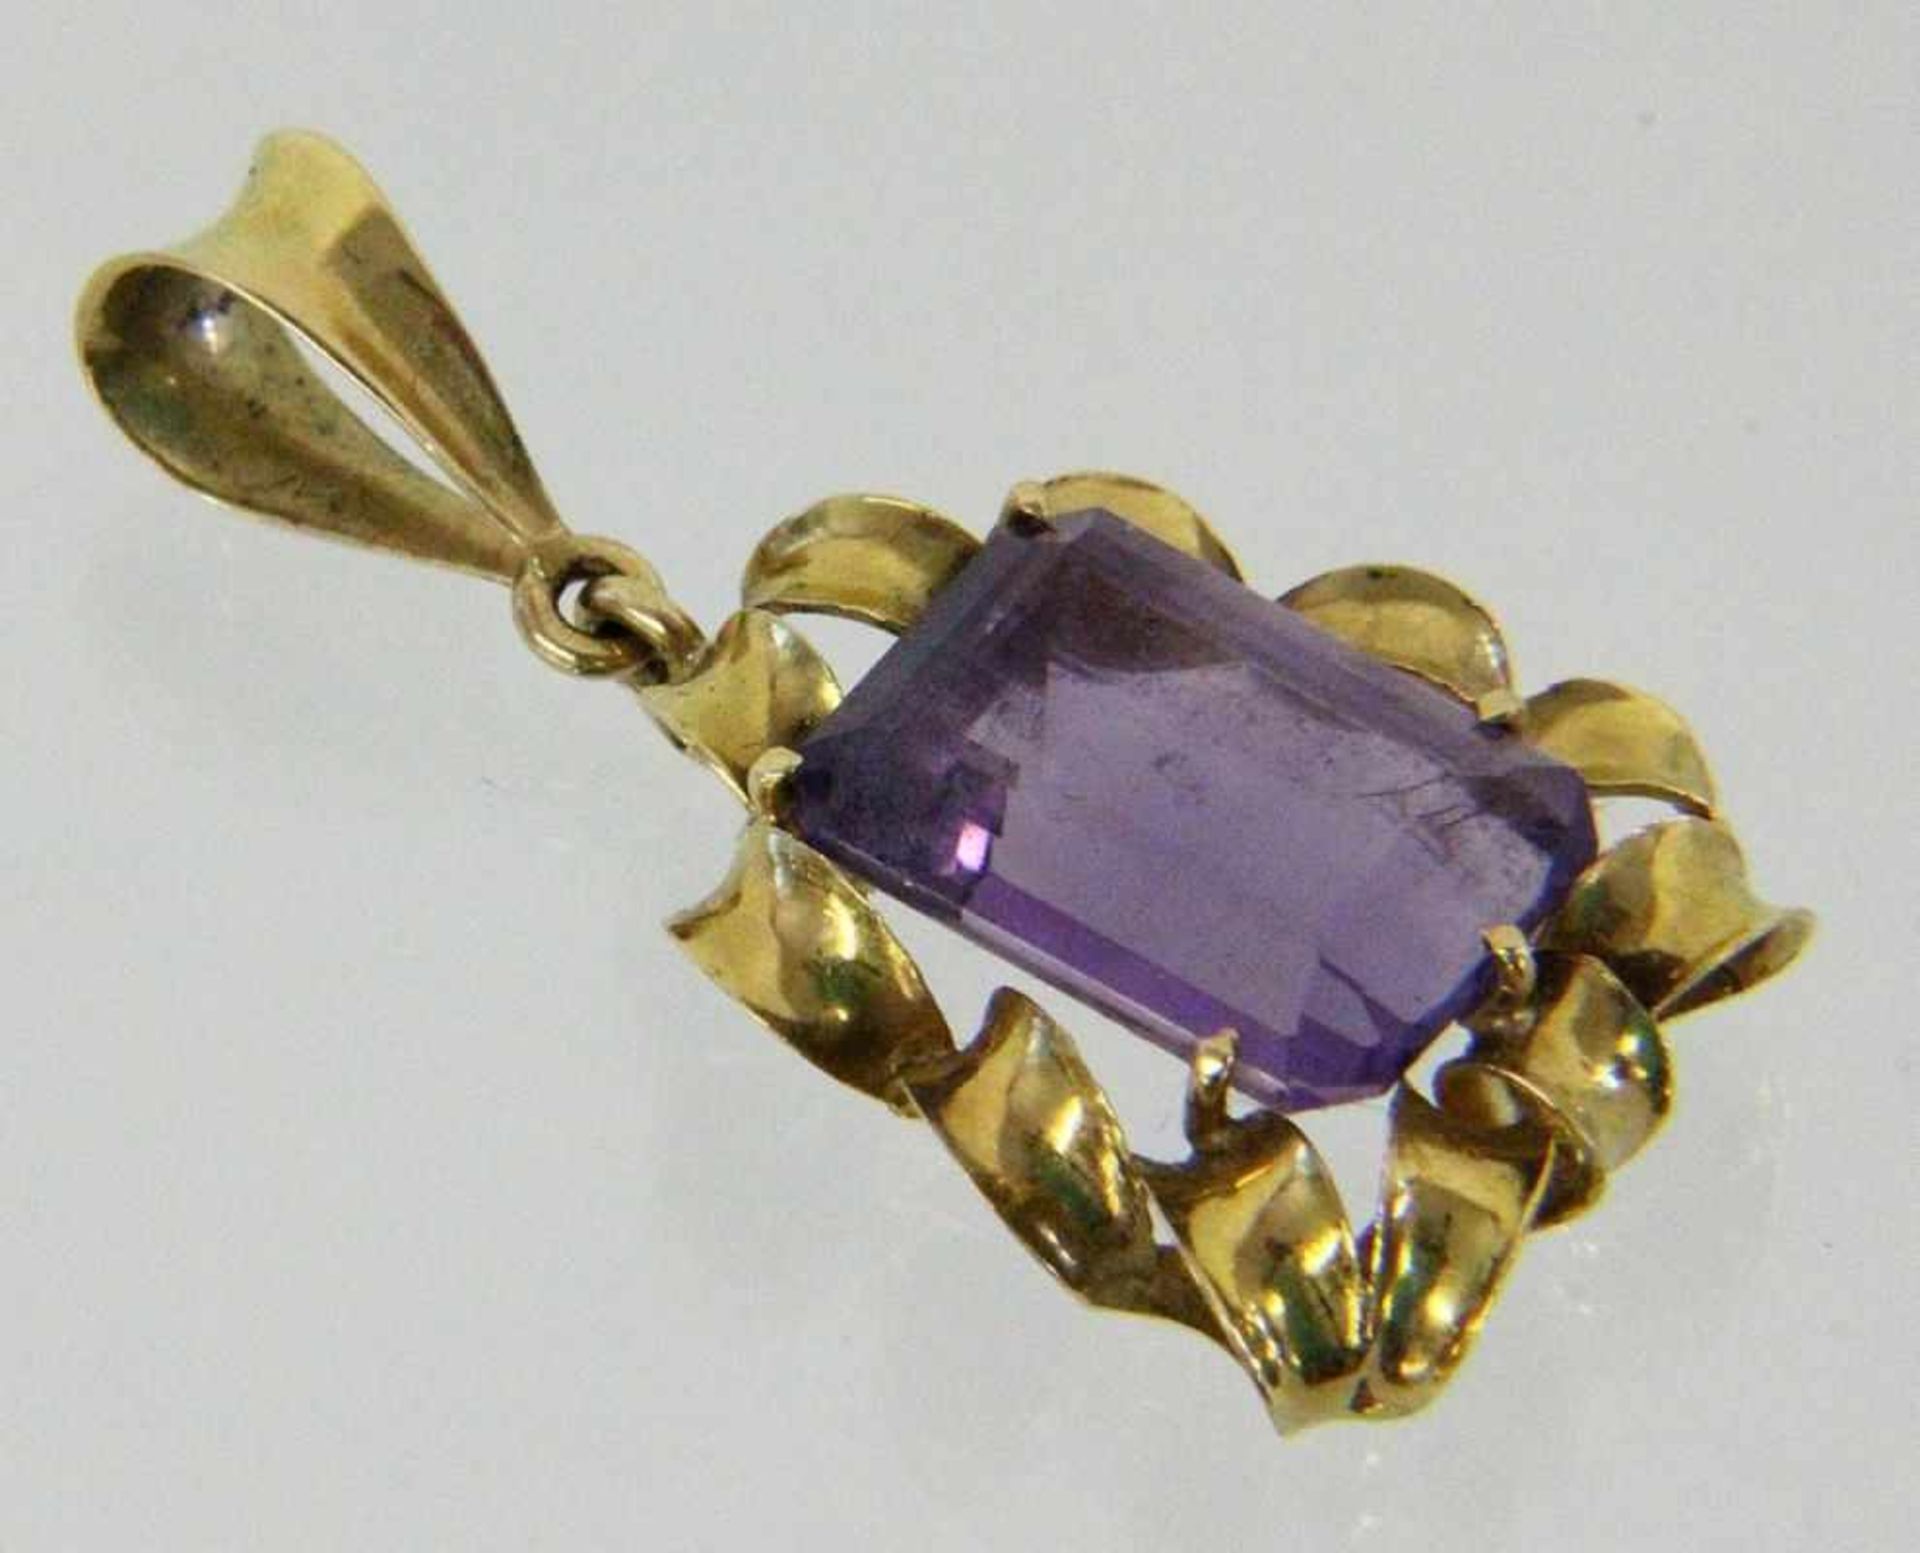 ANHÄNGER 750/000 Gelbgold mit Amethyst. L.4cm, brutto ca. 6,5g A PENDANT 750/000 yellow gold with